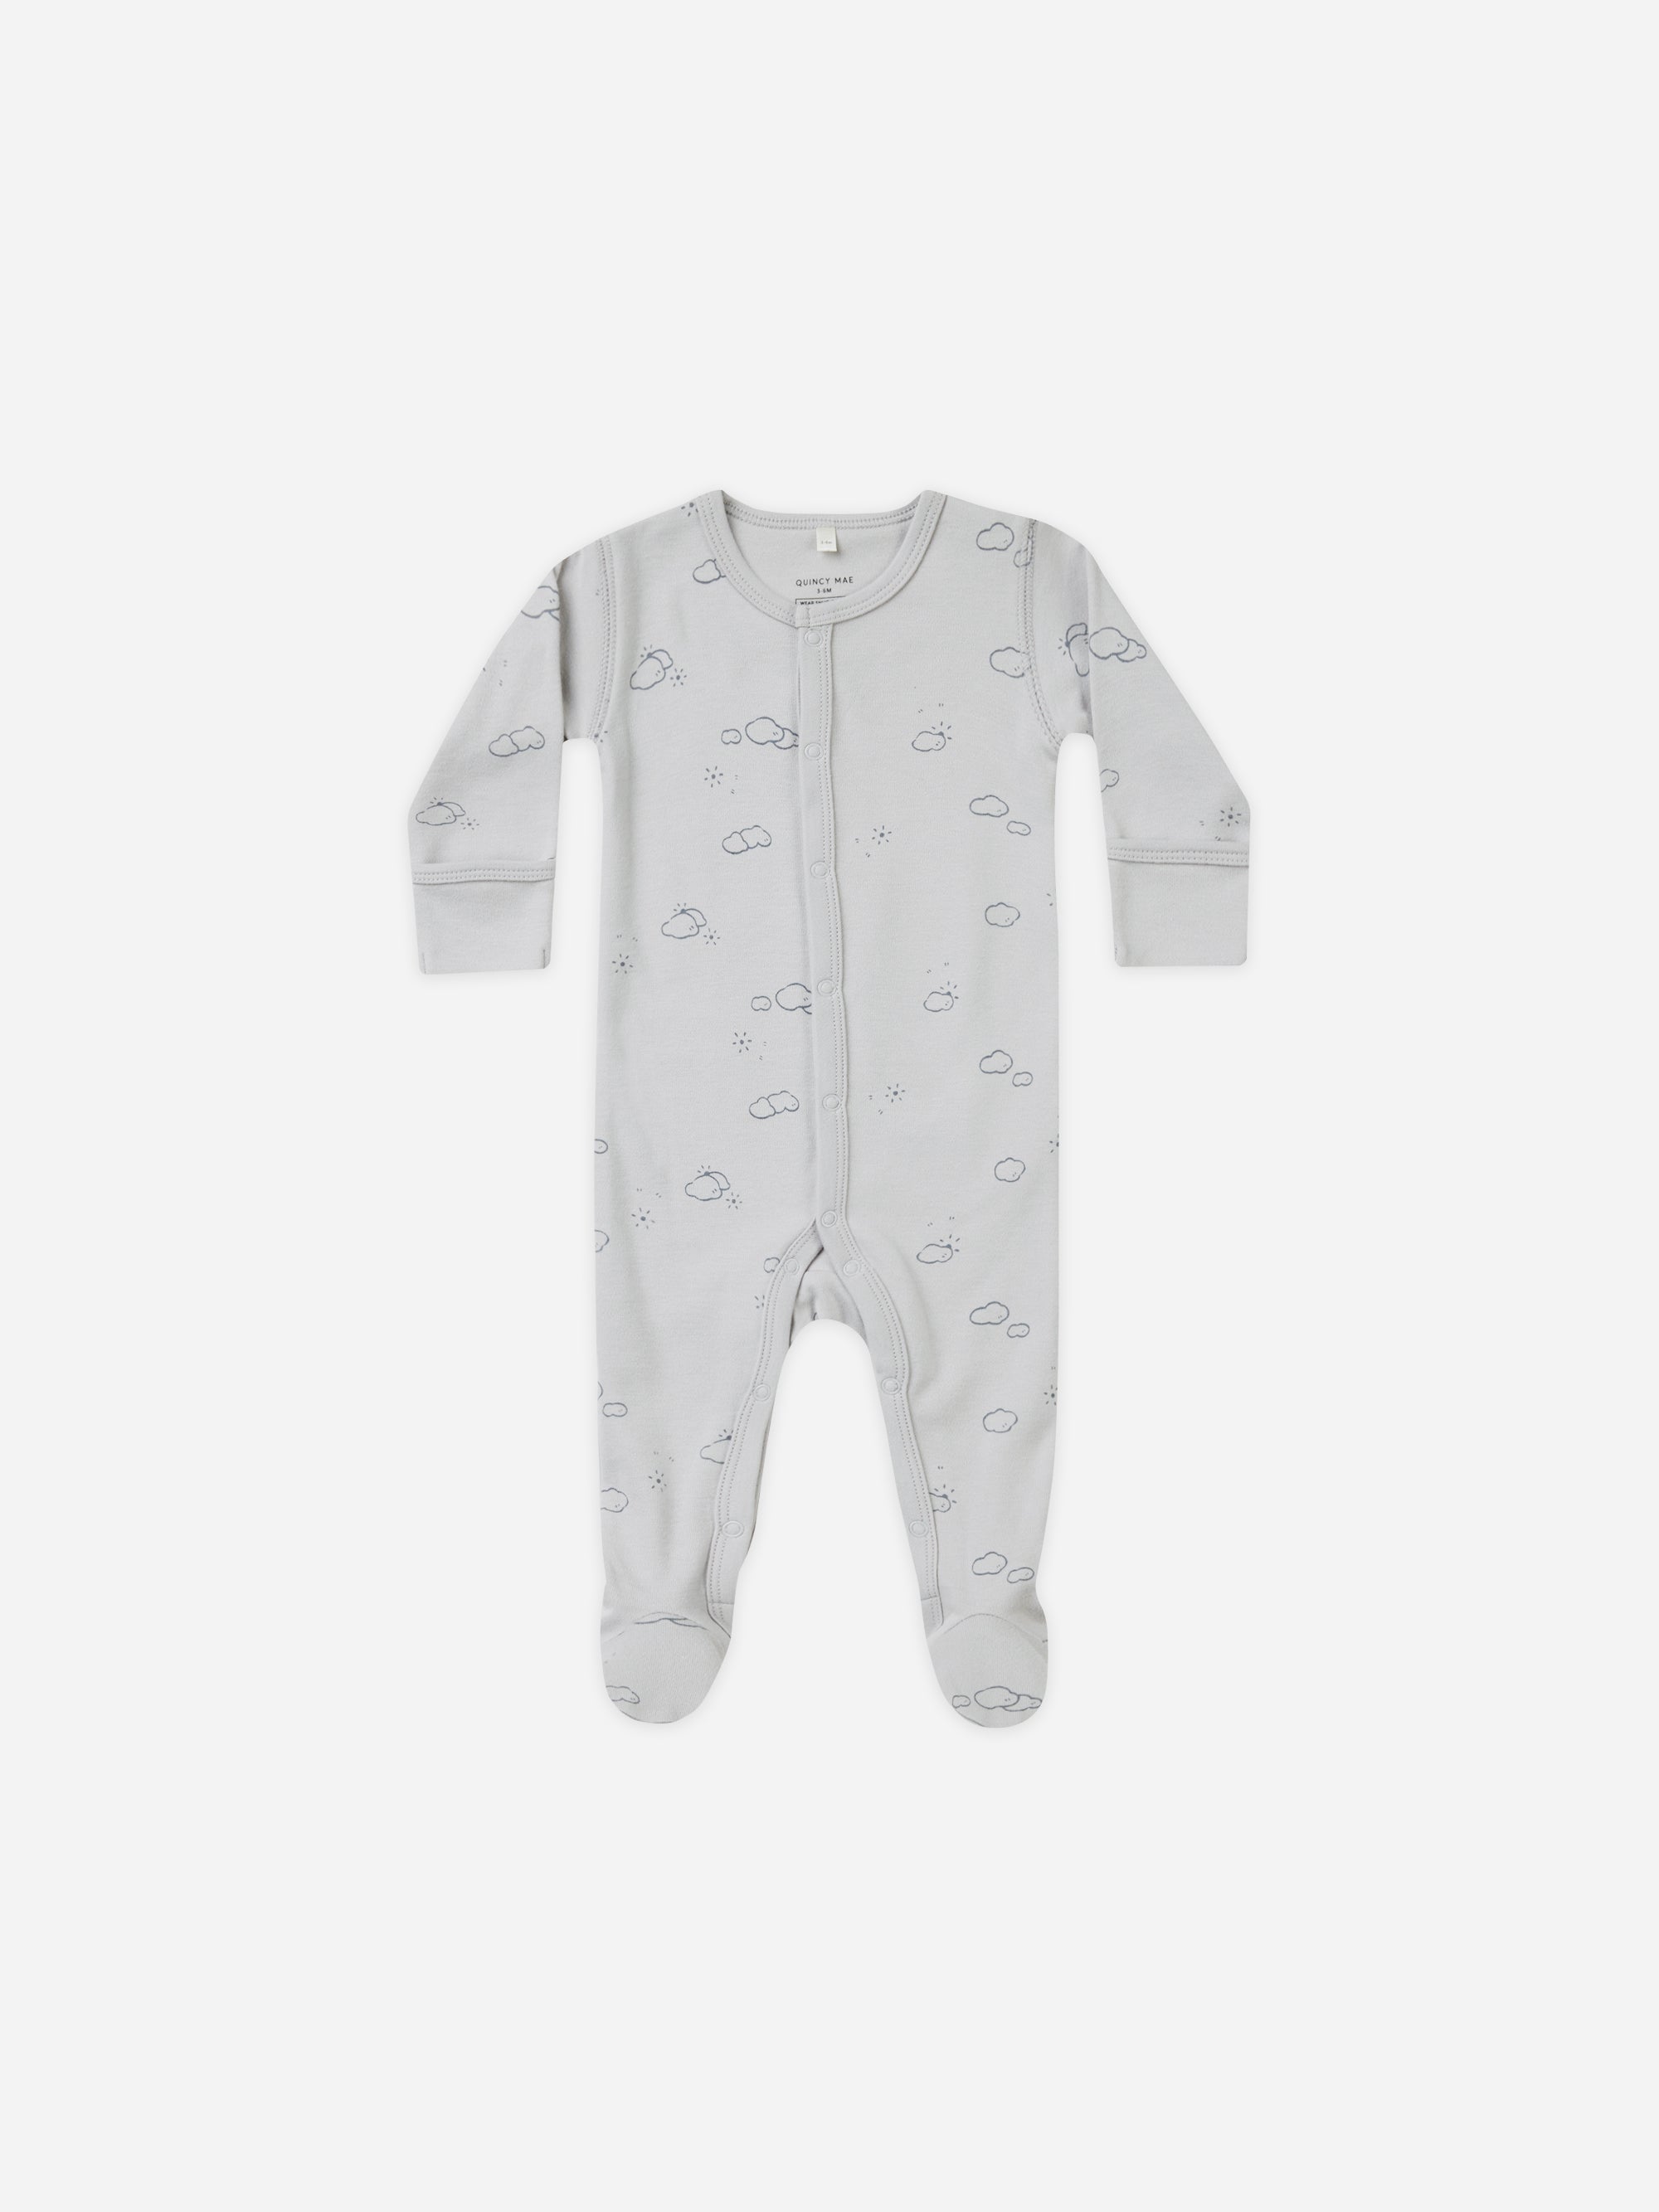 Full Snap Footie || Sunny Day - Rylee + Cru | Kids Clothes | Trendy Baby Clothes | Modern Infant Outfits |